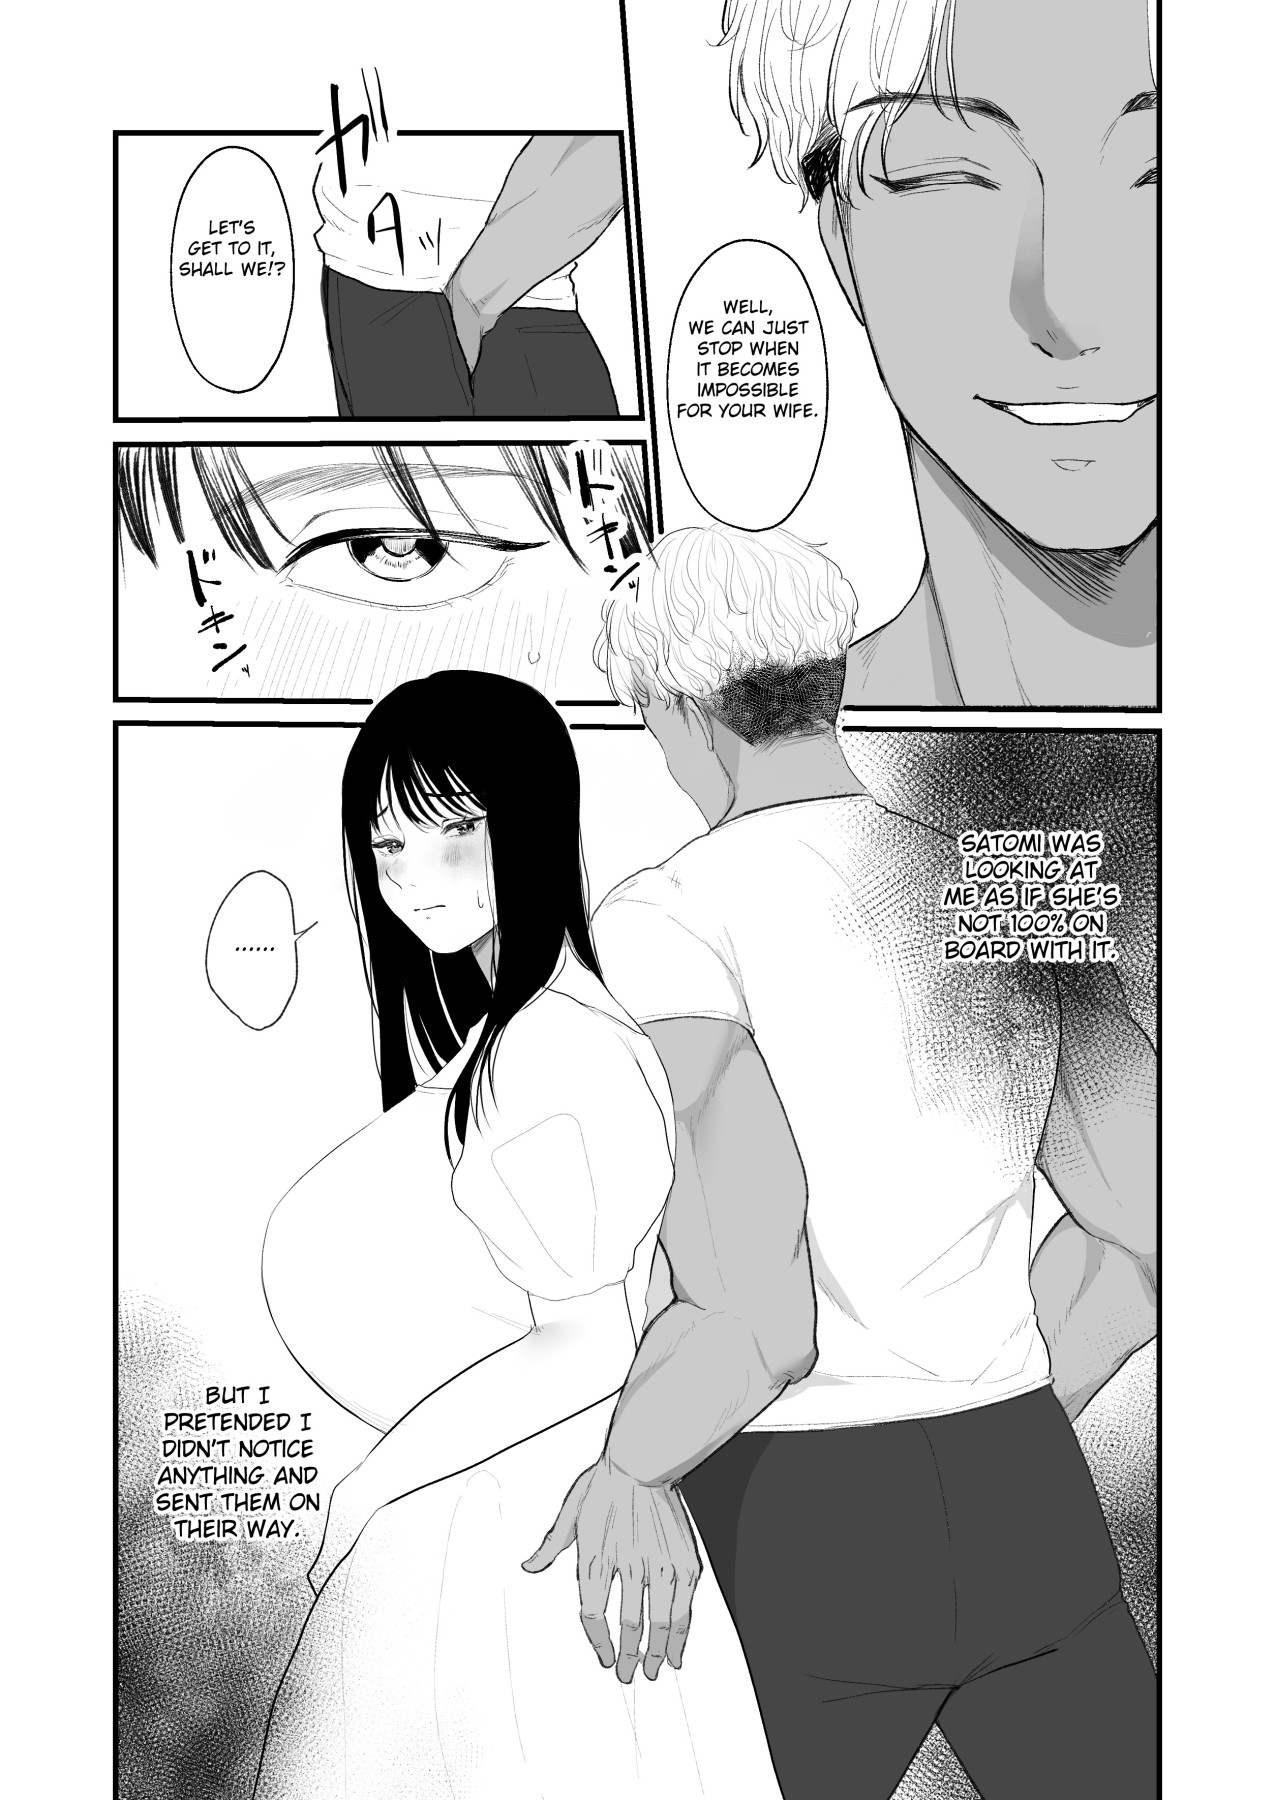 Hentai Manga Comic-Once My Wife Shows a Side To Him She's Never Shown To Me I've Really Been NTR'd-Read-3